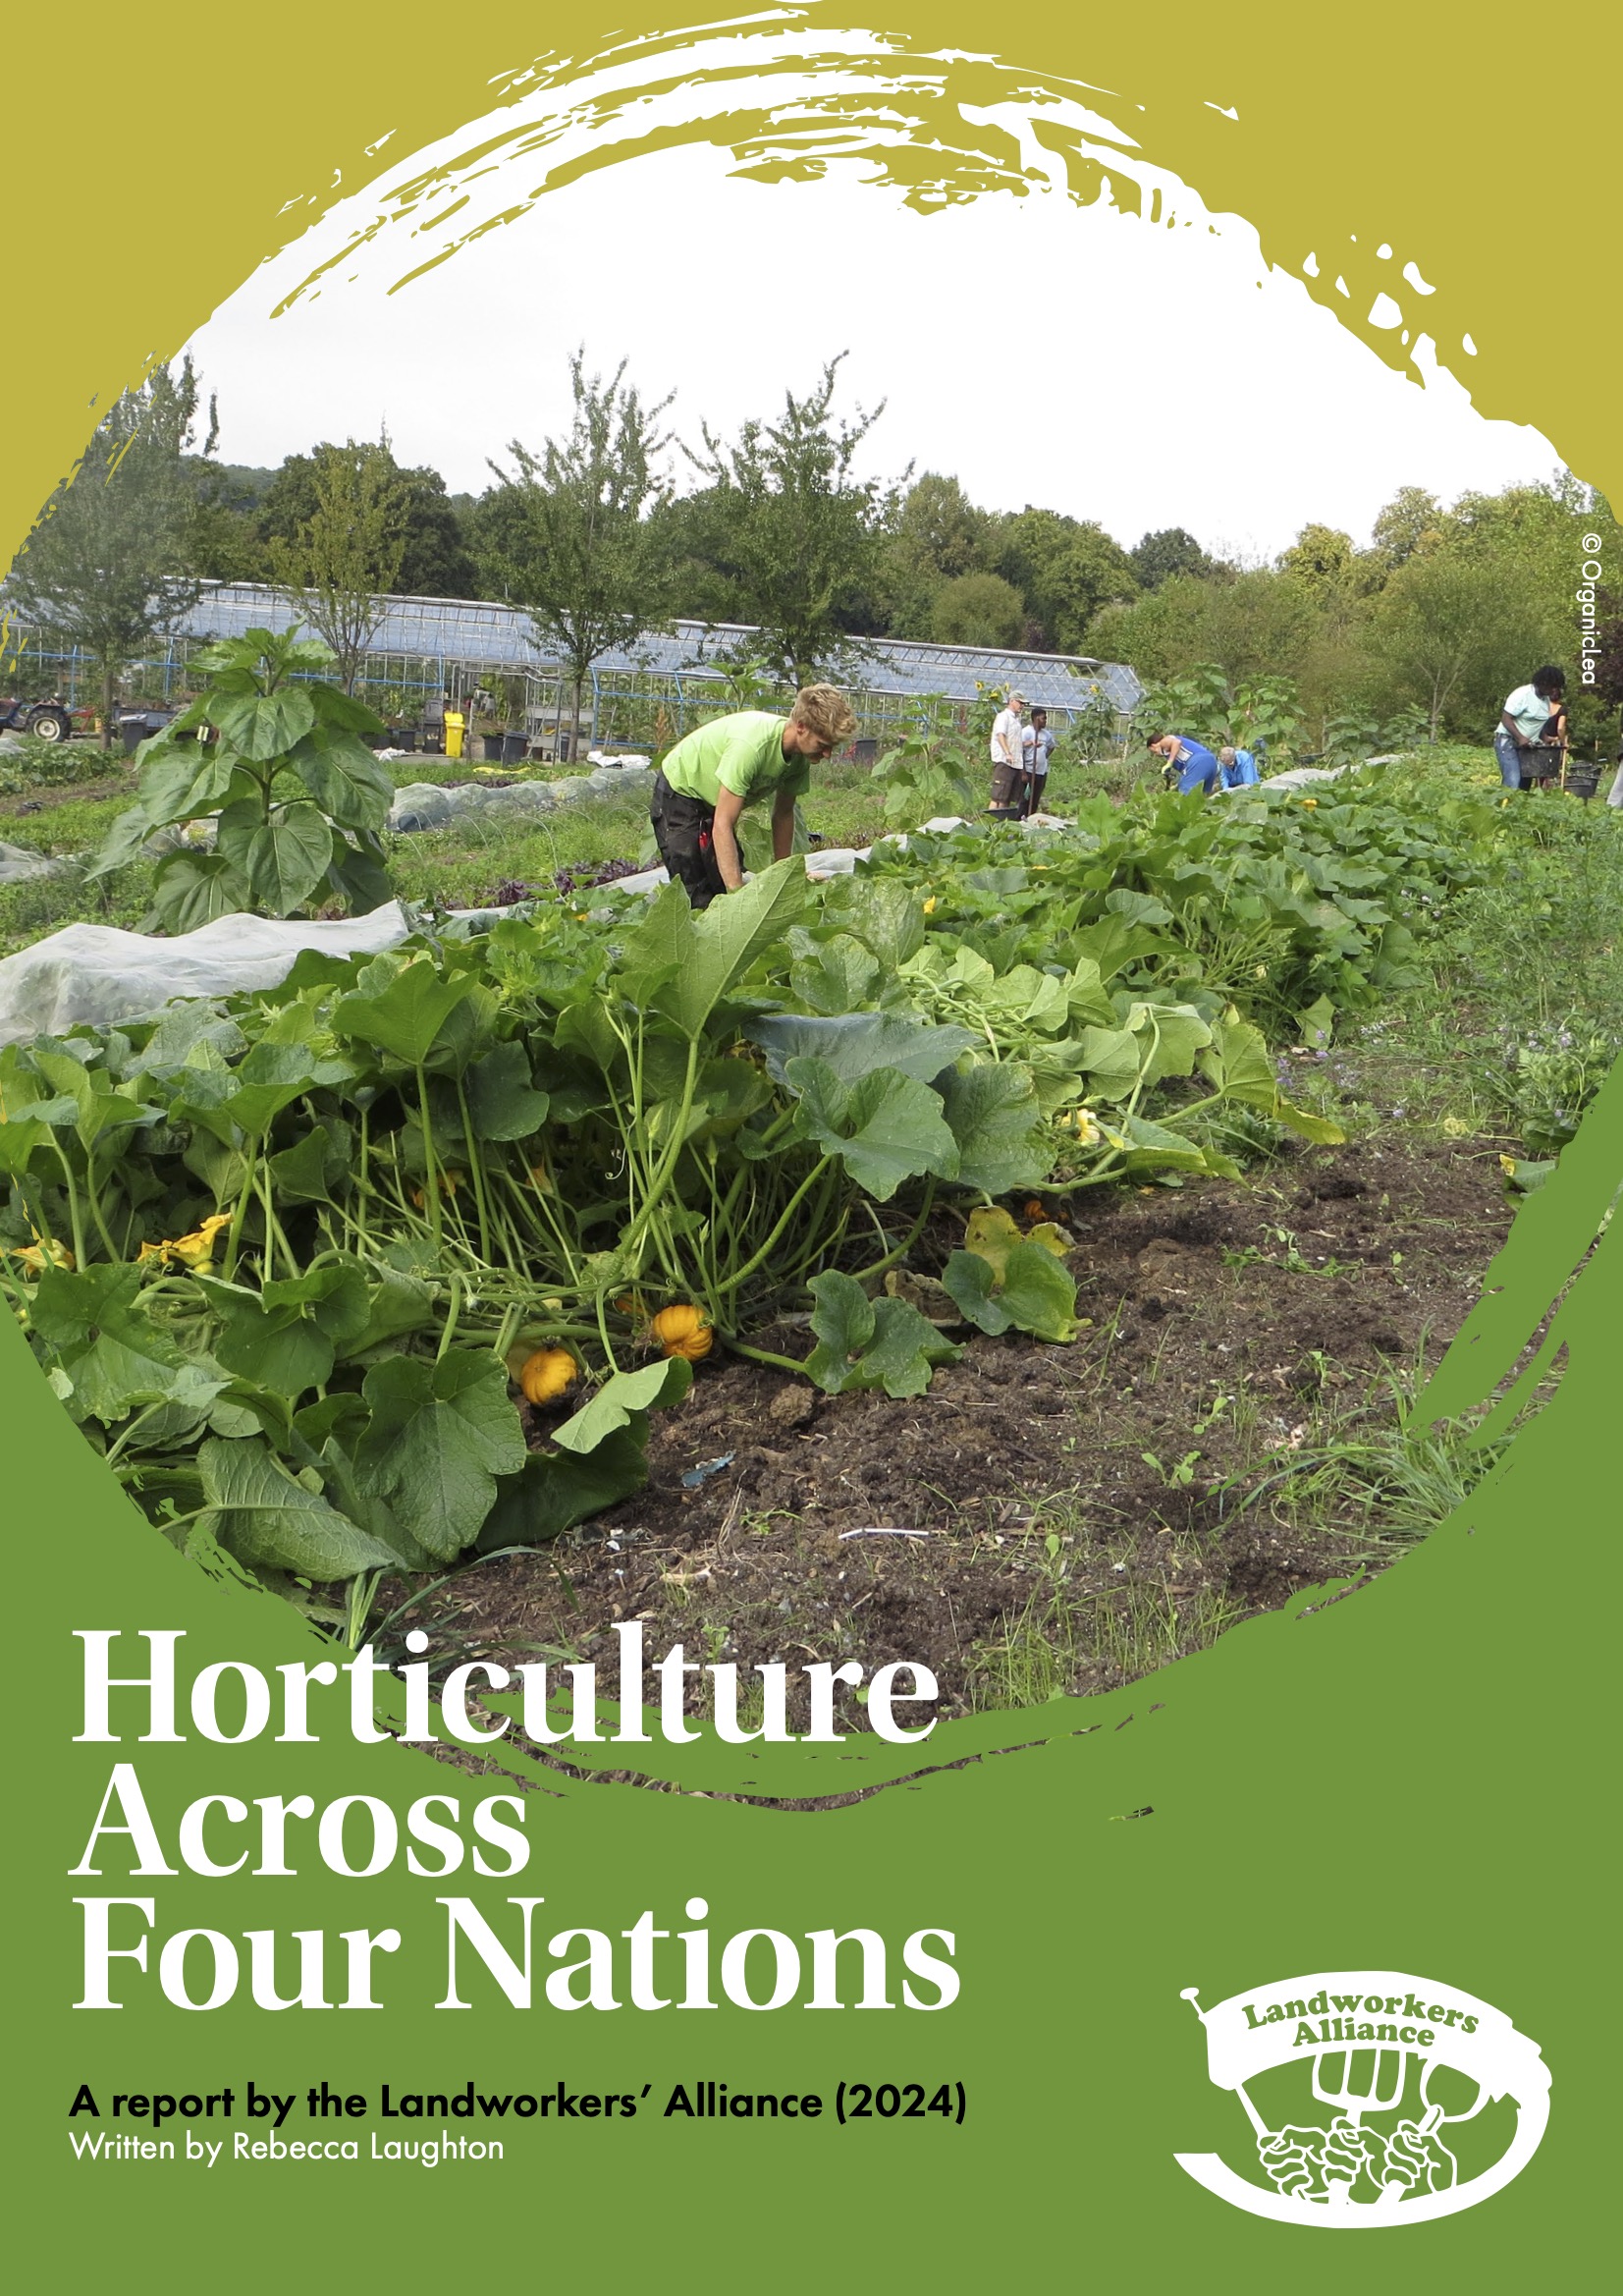 NEW REPORT: Horticulture Across Four Nations - Landworkers Alliance